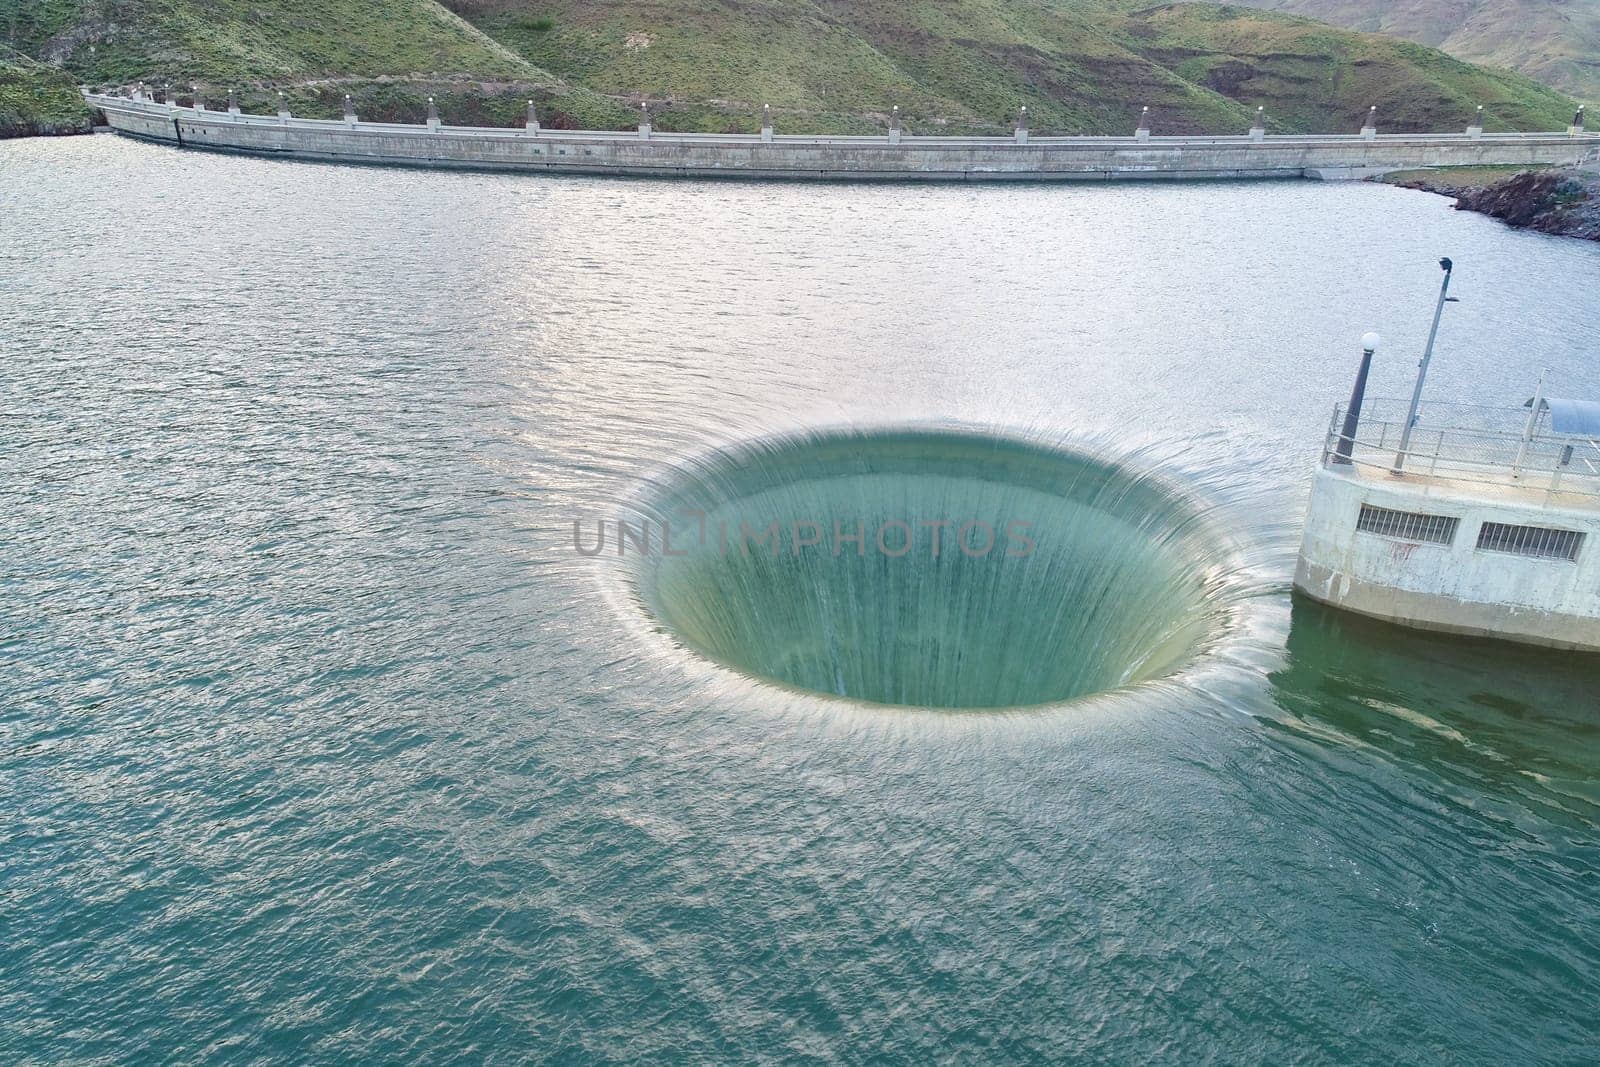 spillway near a dam to prevent overflowing water